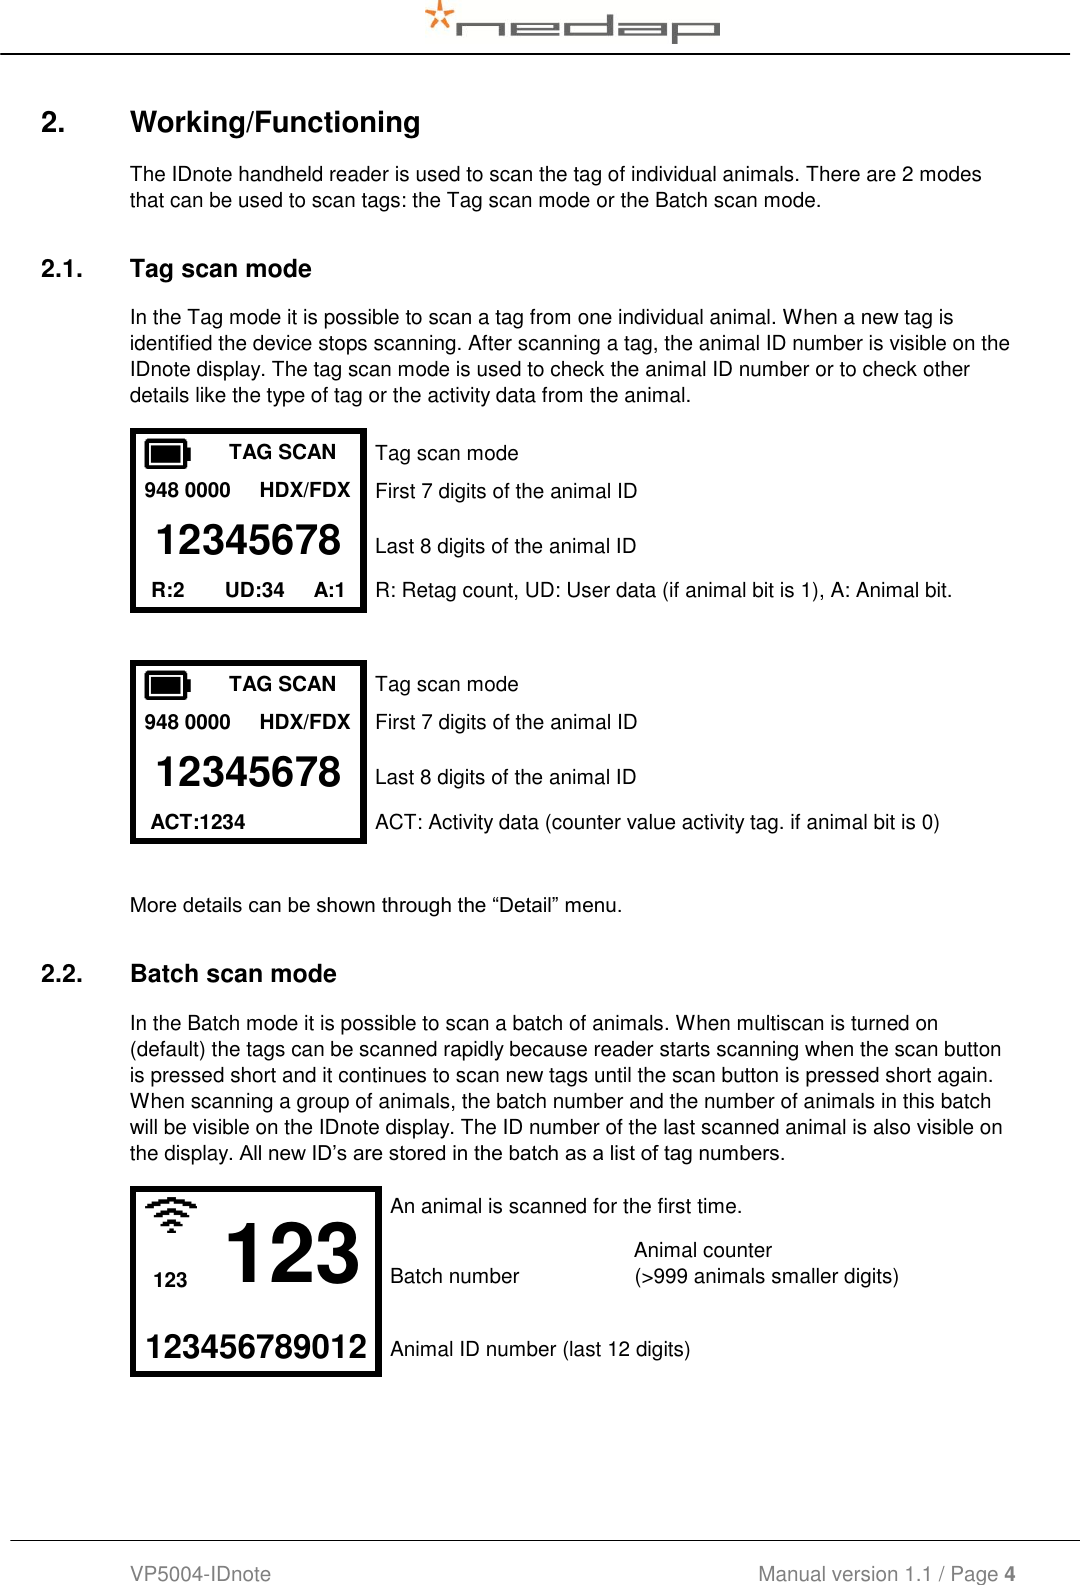  VP5004-IDnote                                             Manual version 1.1 / Page 4  2.  Working/Functioning The IDnote handheld reader is used to scan the tag of individual animals. There are 2 modes that can be used to scan tags: the Tag scan mode or the Batch scan mode. 2.1.  Tag scan mode In the Tag mode it is possible to scan a tag from one individual animal. When a new tag is identified the device stops scanning. After scanning a tag, the animal ID number is visible on the IDnote display. The tag scan mode is used to check the animal ID number or to check other details like the type of tag or the activity data from the animal.  TAG SCAN Tag scan mode 948 0000     HDX/FDX First 7 digits of the animal ID 12345678 Last 8 digits of the animal ID R:2       UD:34     A:1       R: Retag count, UD: User data (if animal bit is 1), A: Animal bit.    TAG SCAN Tag scan mode 948 0000     HDX/FDX First 7 digits of the animal ID 12345678 Last 8 digits of the animal ID  ACT:1234  ACT: Activity data (counter value activity tag. if animal bit is 0)   More details can be shown through the “Detail” menu. 2.2.  Batch scan mode In the Batch mode it is possible to scan a batch of animals. When multiscan is turned on (default) the tags can be scanned rapidly because reader starts scanning when the scan button is pressed short and it continues to scan new tags until the scan button is pressed short again. When scanning a group of animals, the batch number and the number of animals in this batch will be visible on the IDnote display. The ID number of the last scanned animal is also visible on the display. All new ID’s are stored in the batch as a list of tag numbers.  123 An animal is scanned for the first time.            Animal counter 123 Batch number                    (&gt;999 animals smaller digits)   123456789012 Animal ID number (last 12 digits)   